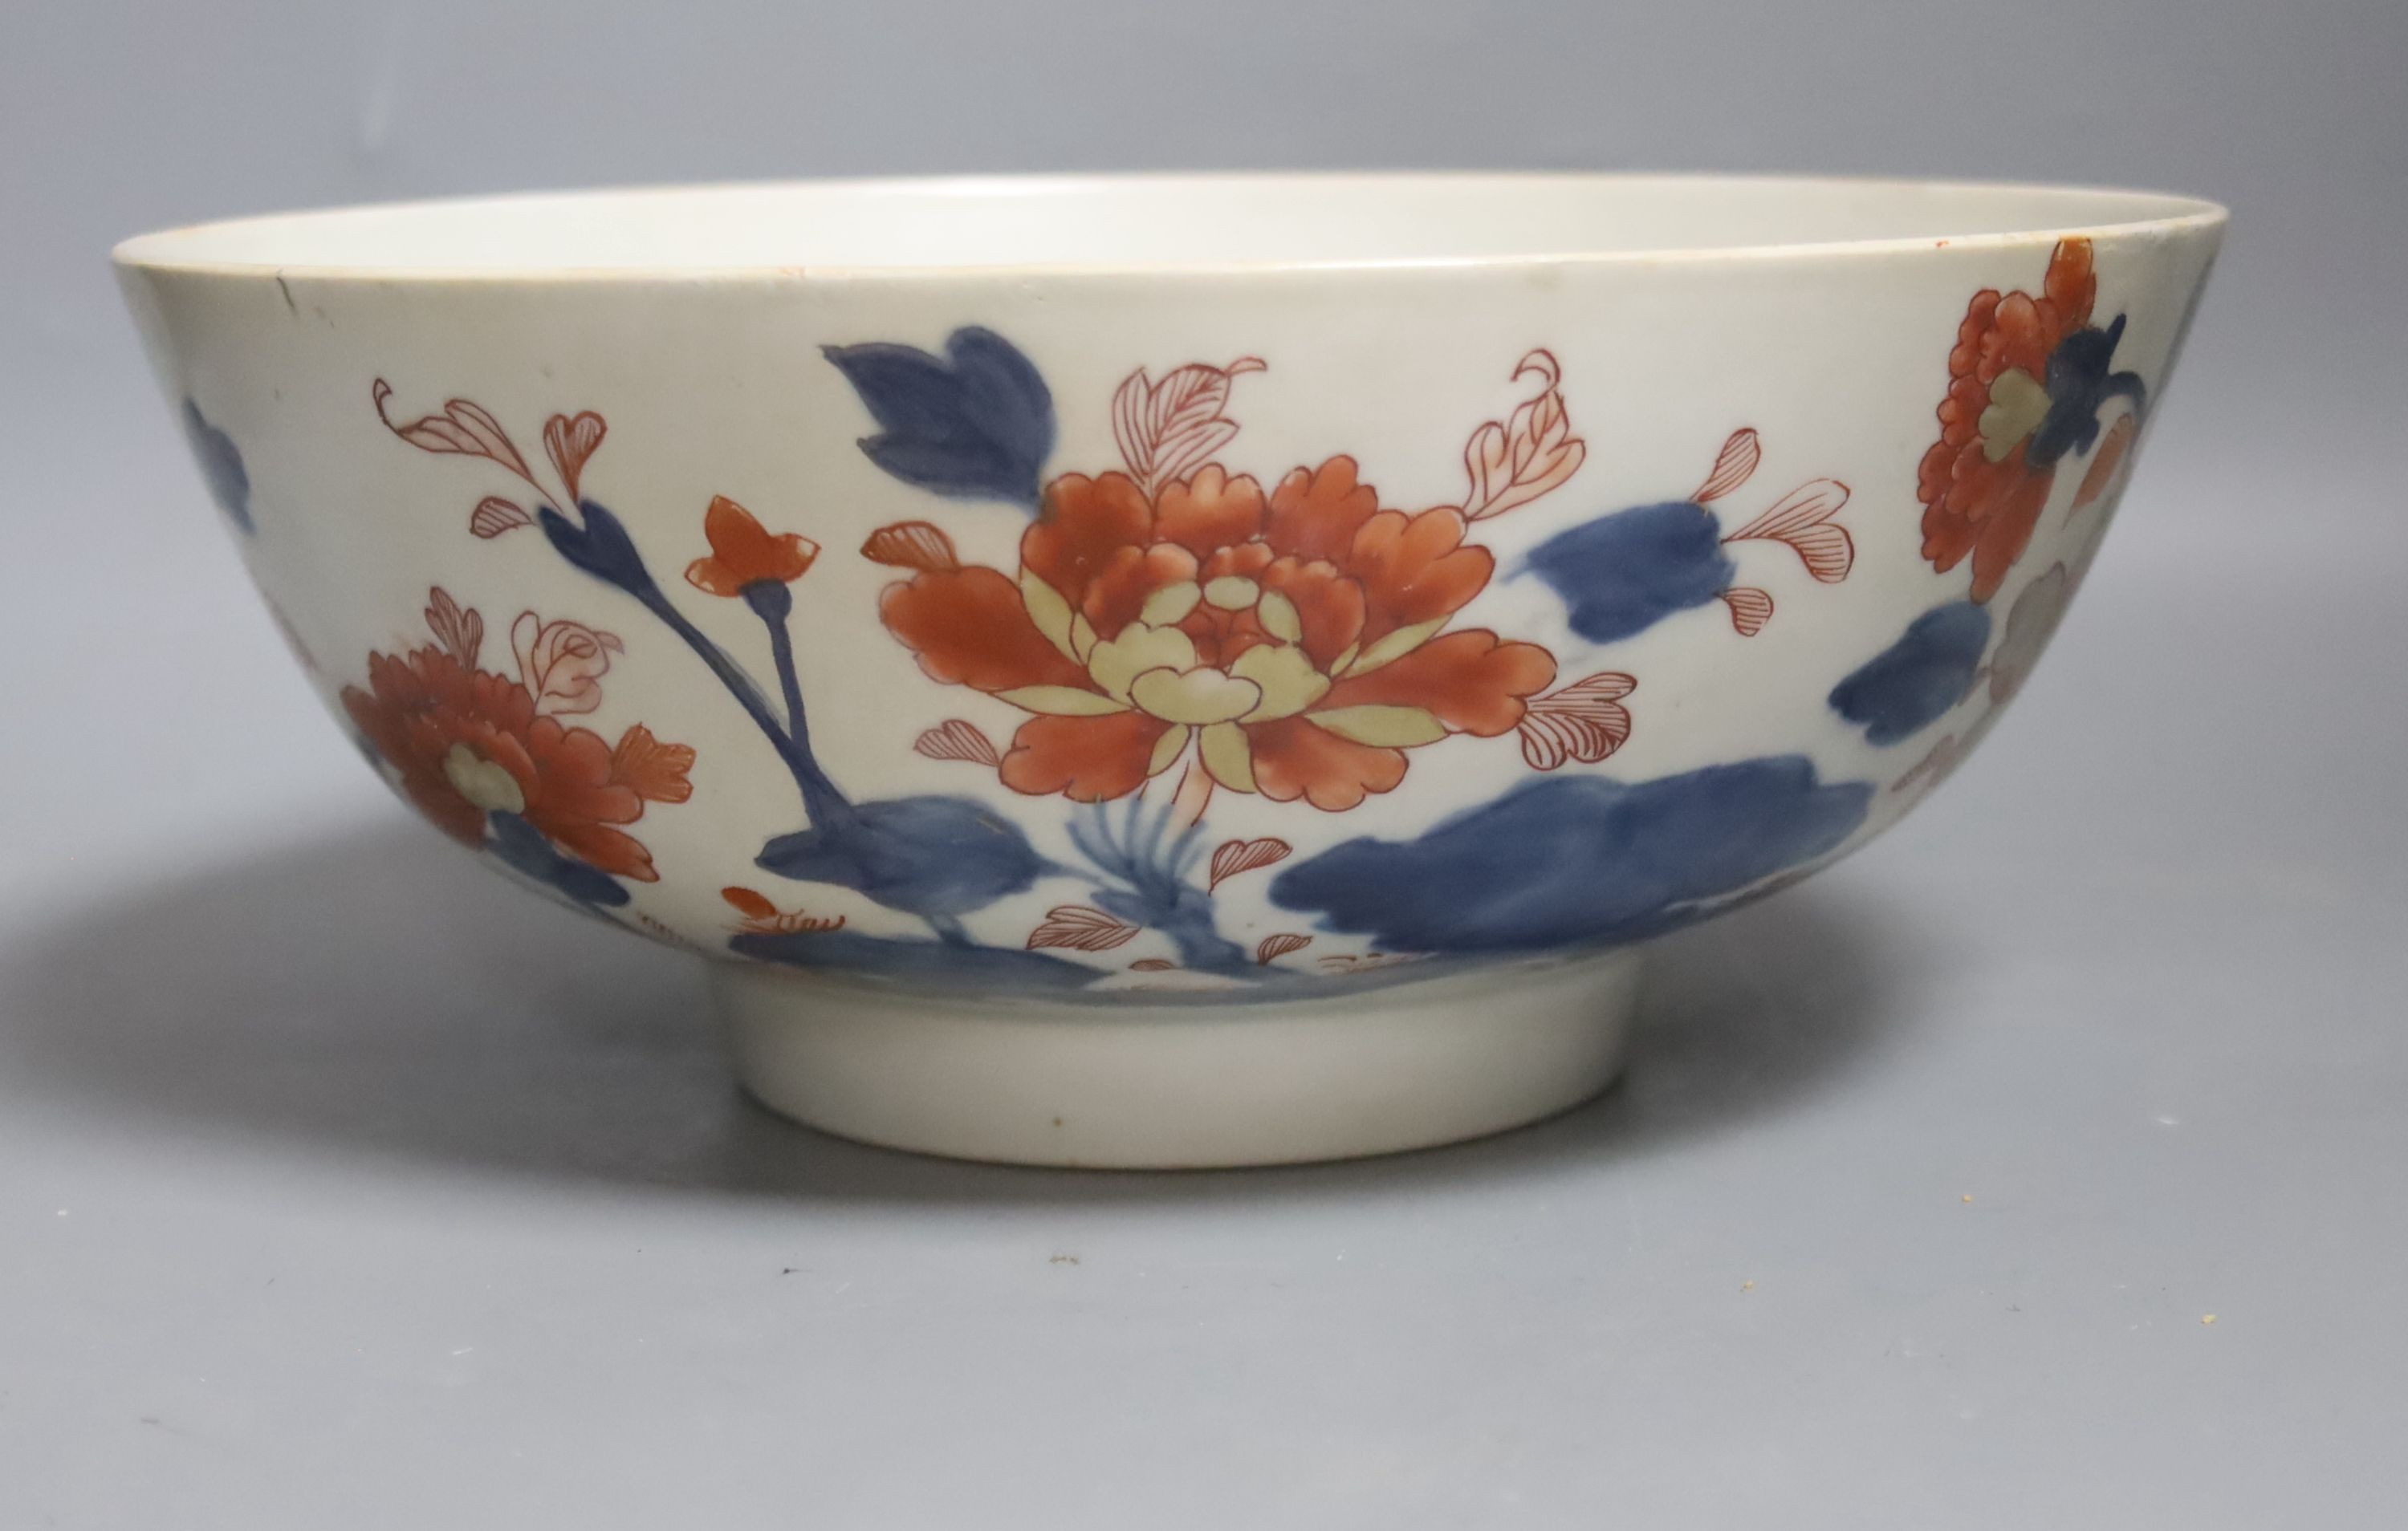 Three 18th century Chinese export porcelain bowls, largest 28 cm and two plates